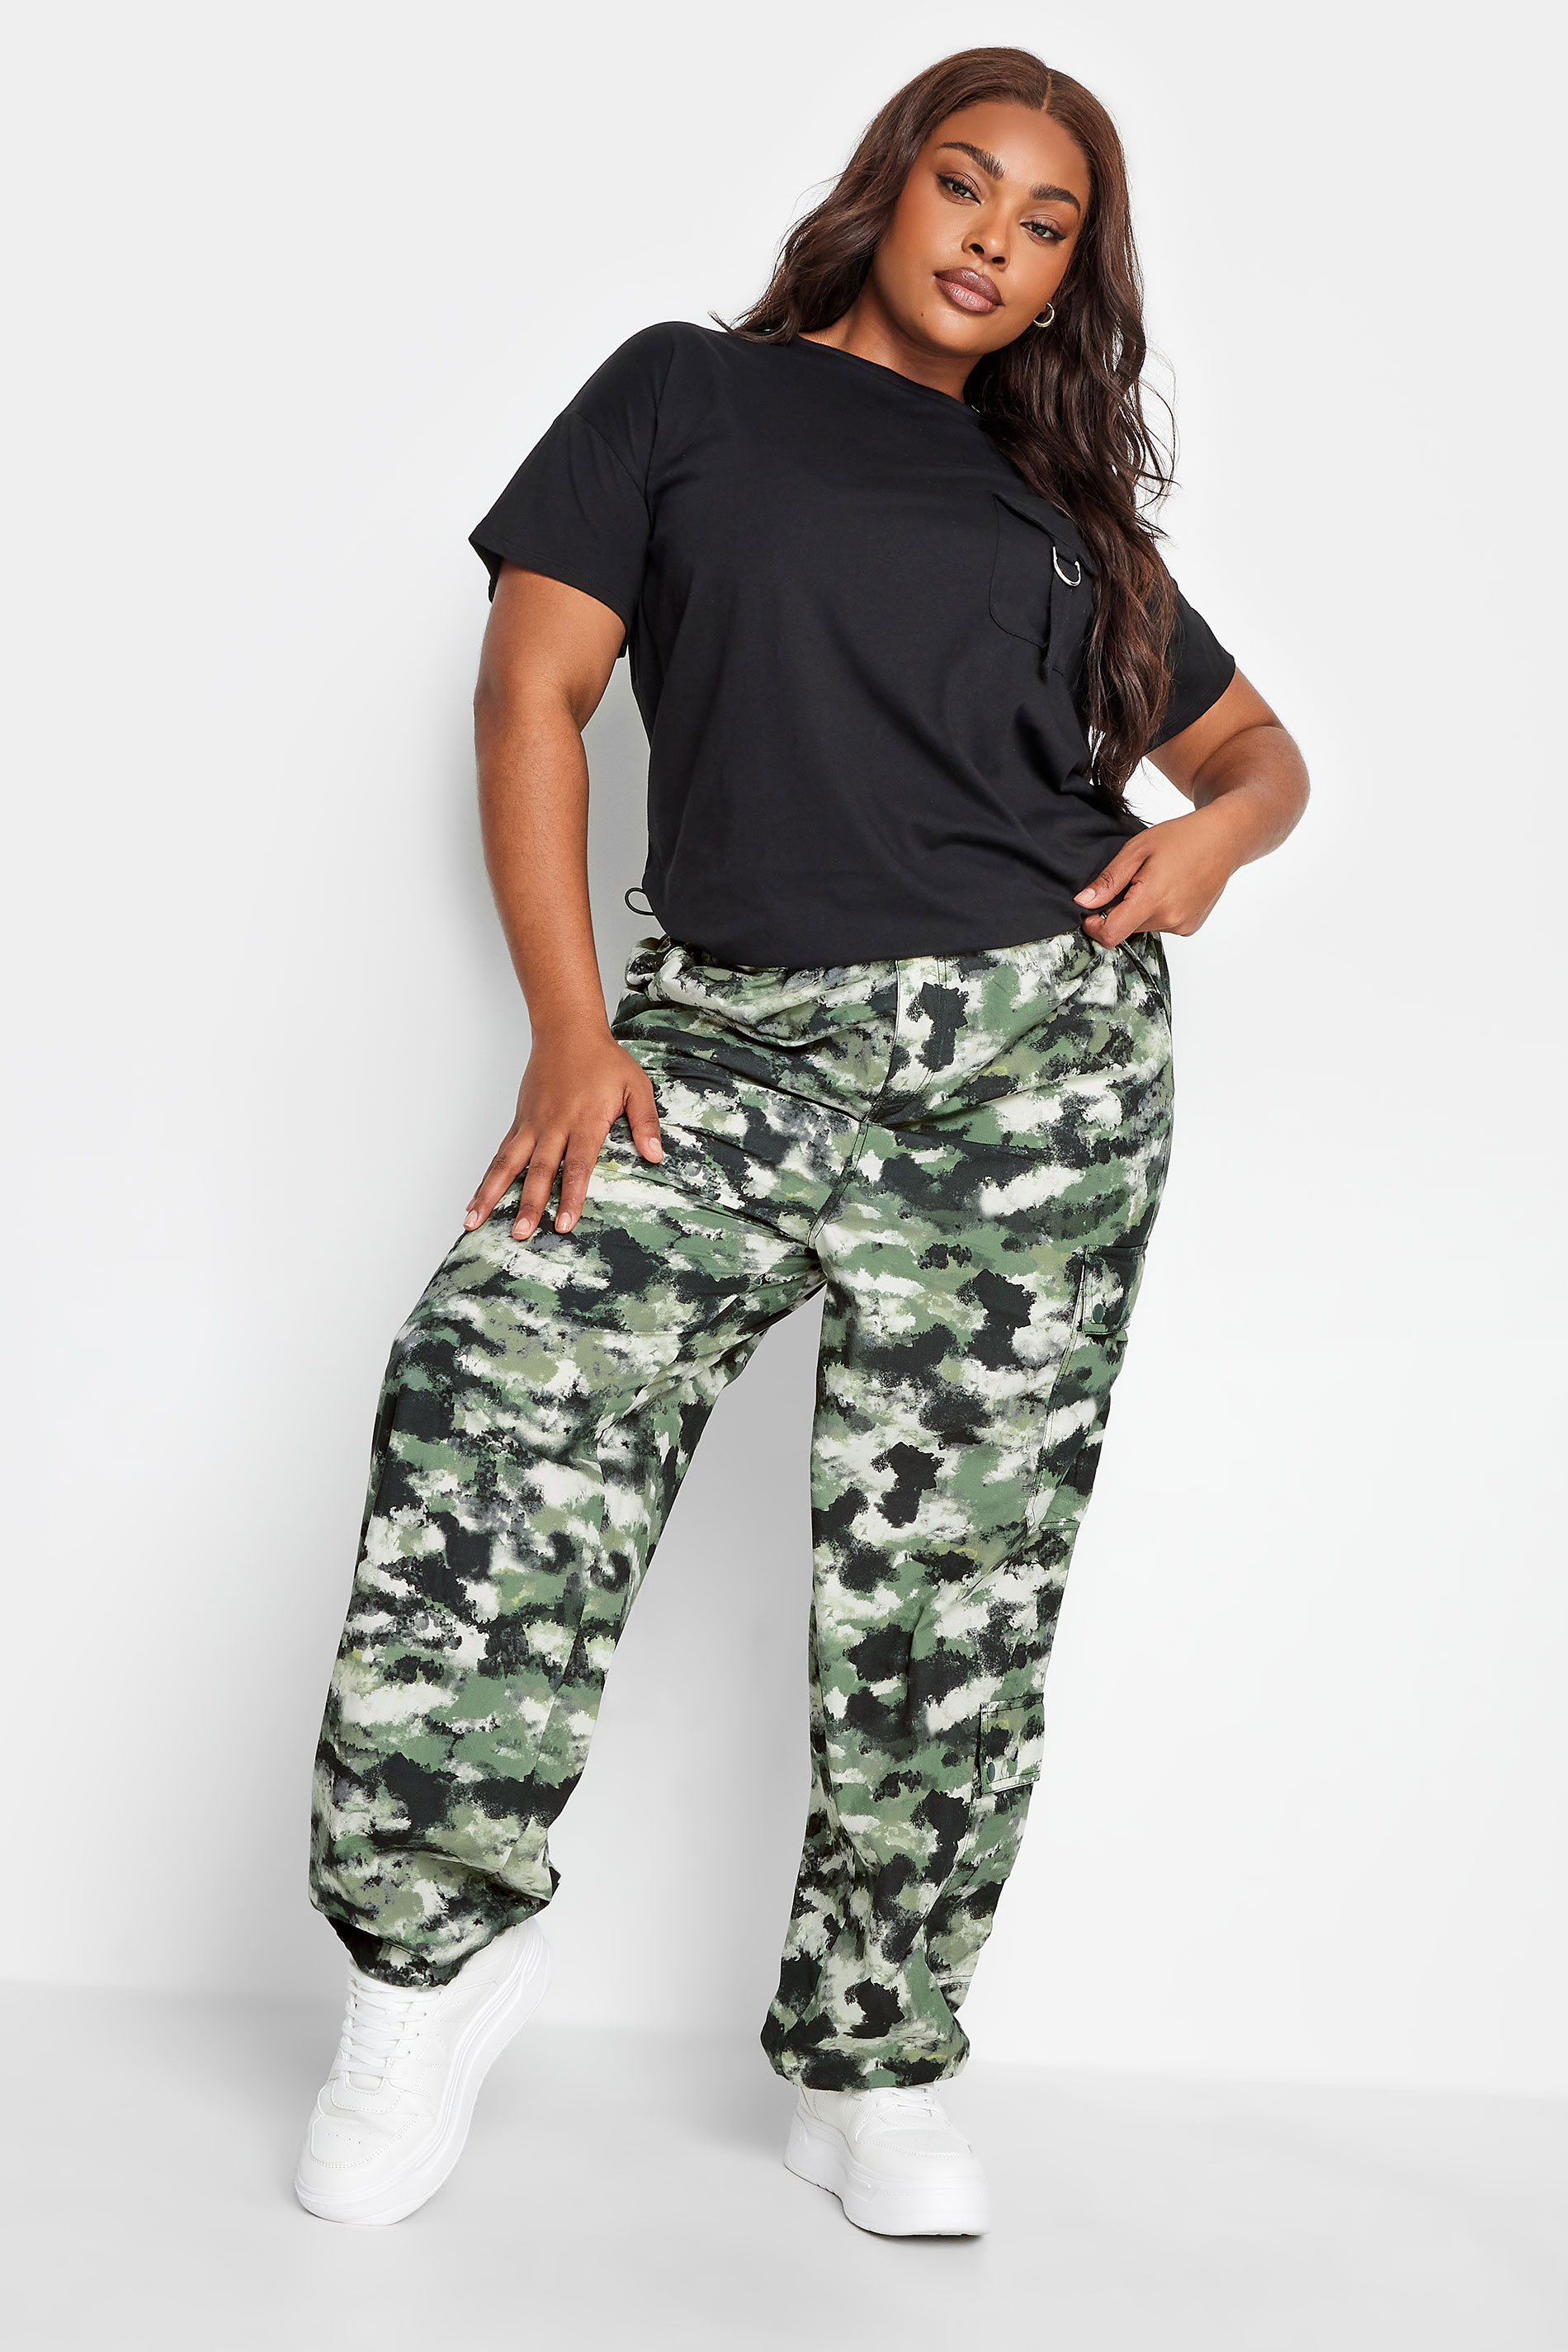 WOMENS JEANS LADIES CAMO PRINT SUPER STRETCHY MAGIC TROUSERS WITH SEQUIN  PANELS | eBay